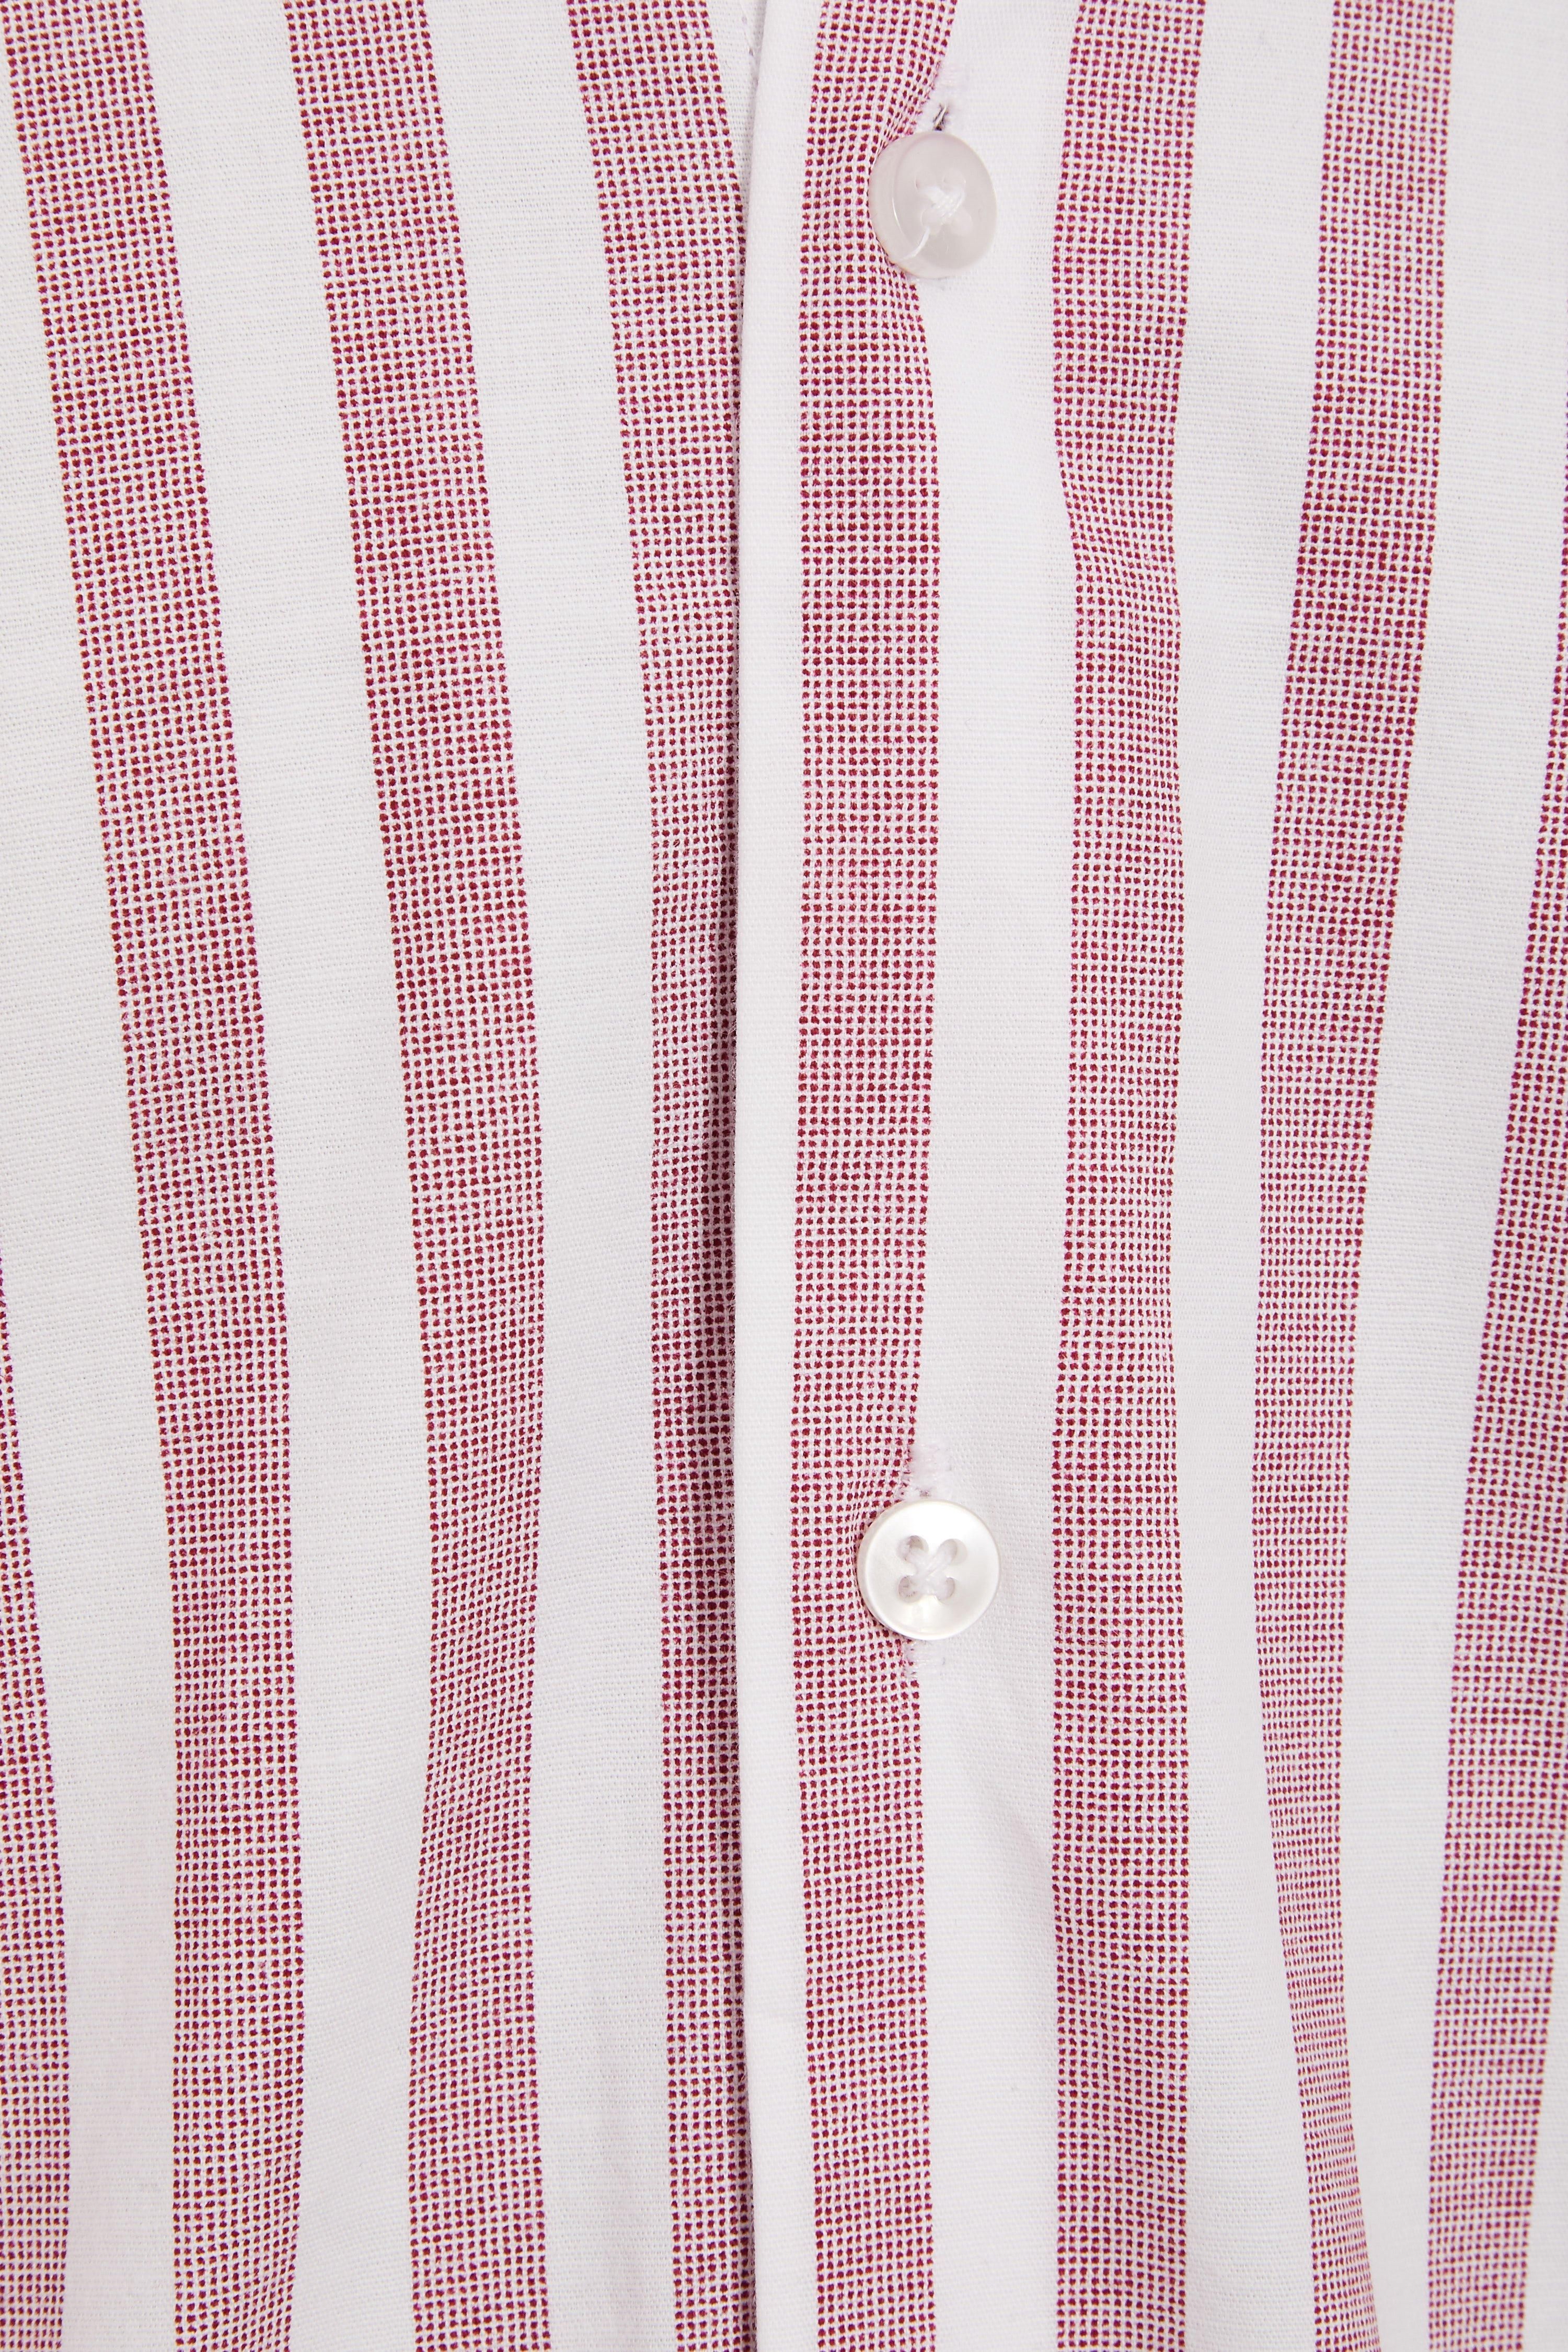 Slim Fit  	Faded Striped Pattern  	Long Sleeved  	Classic Collar  	Button Through Fastening